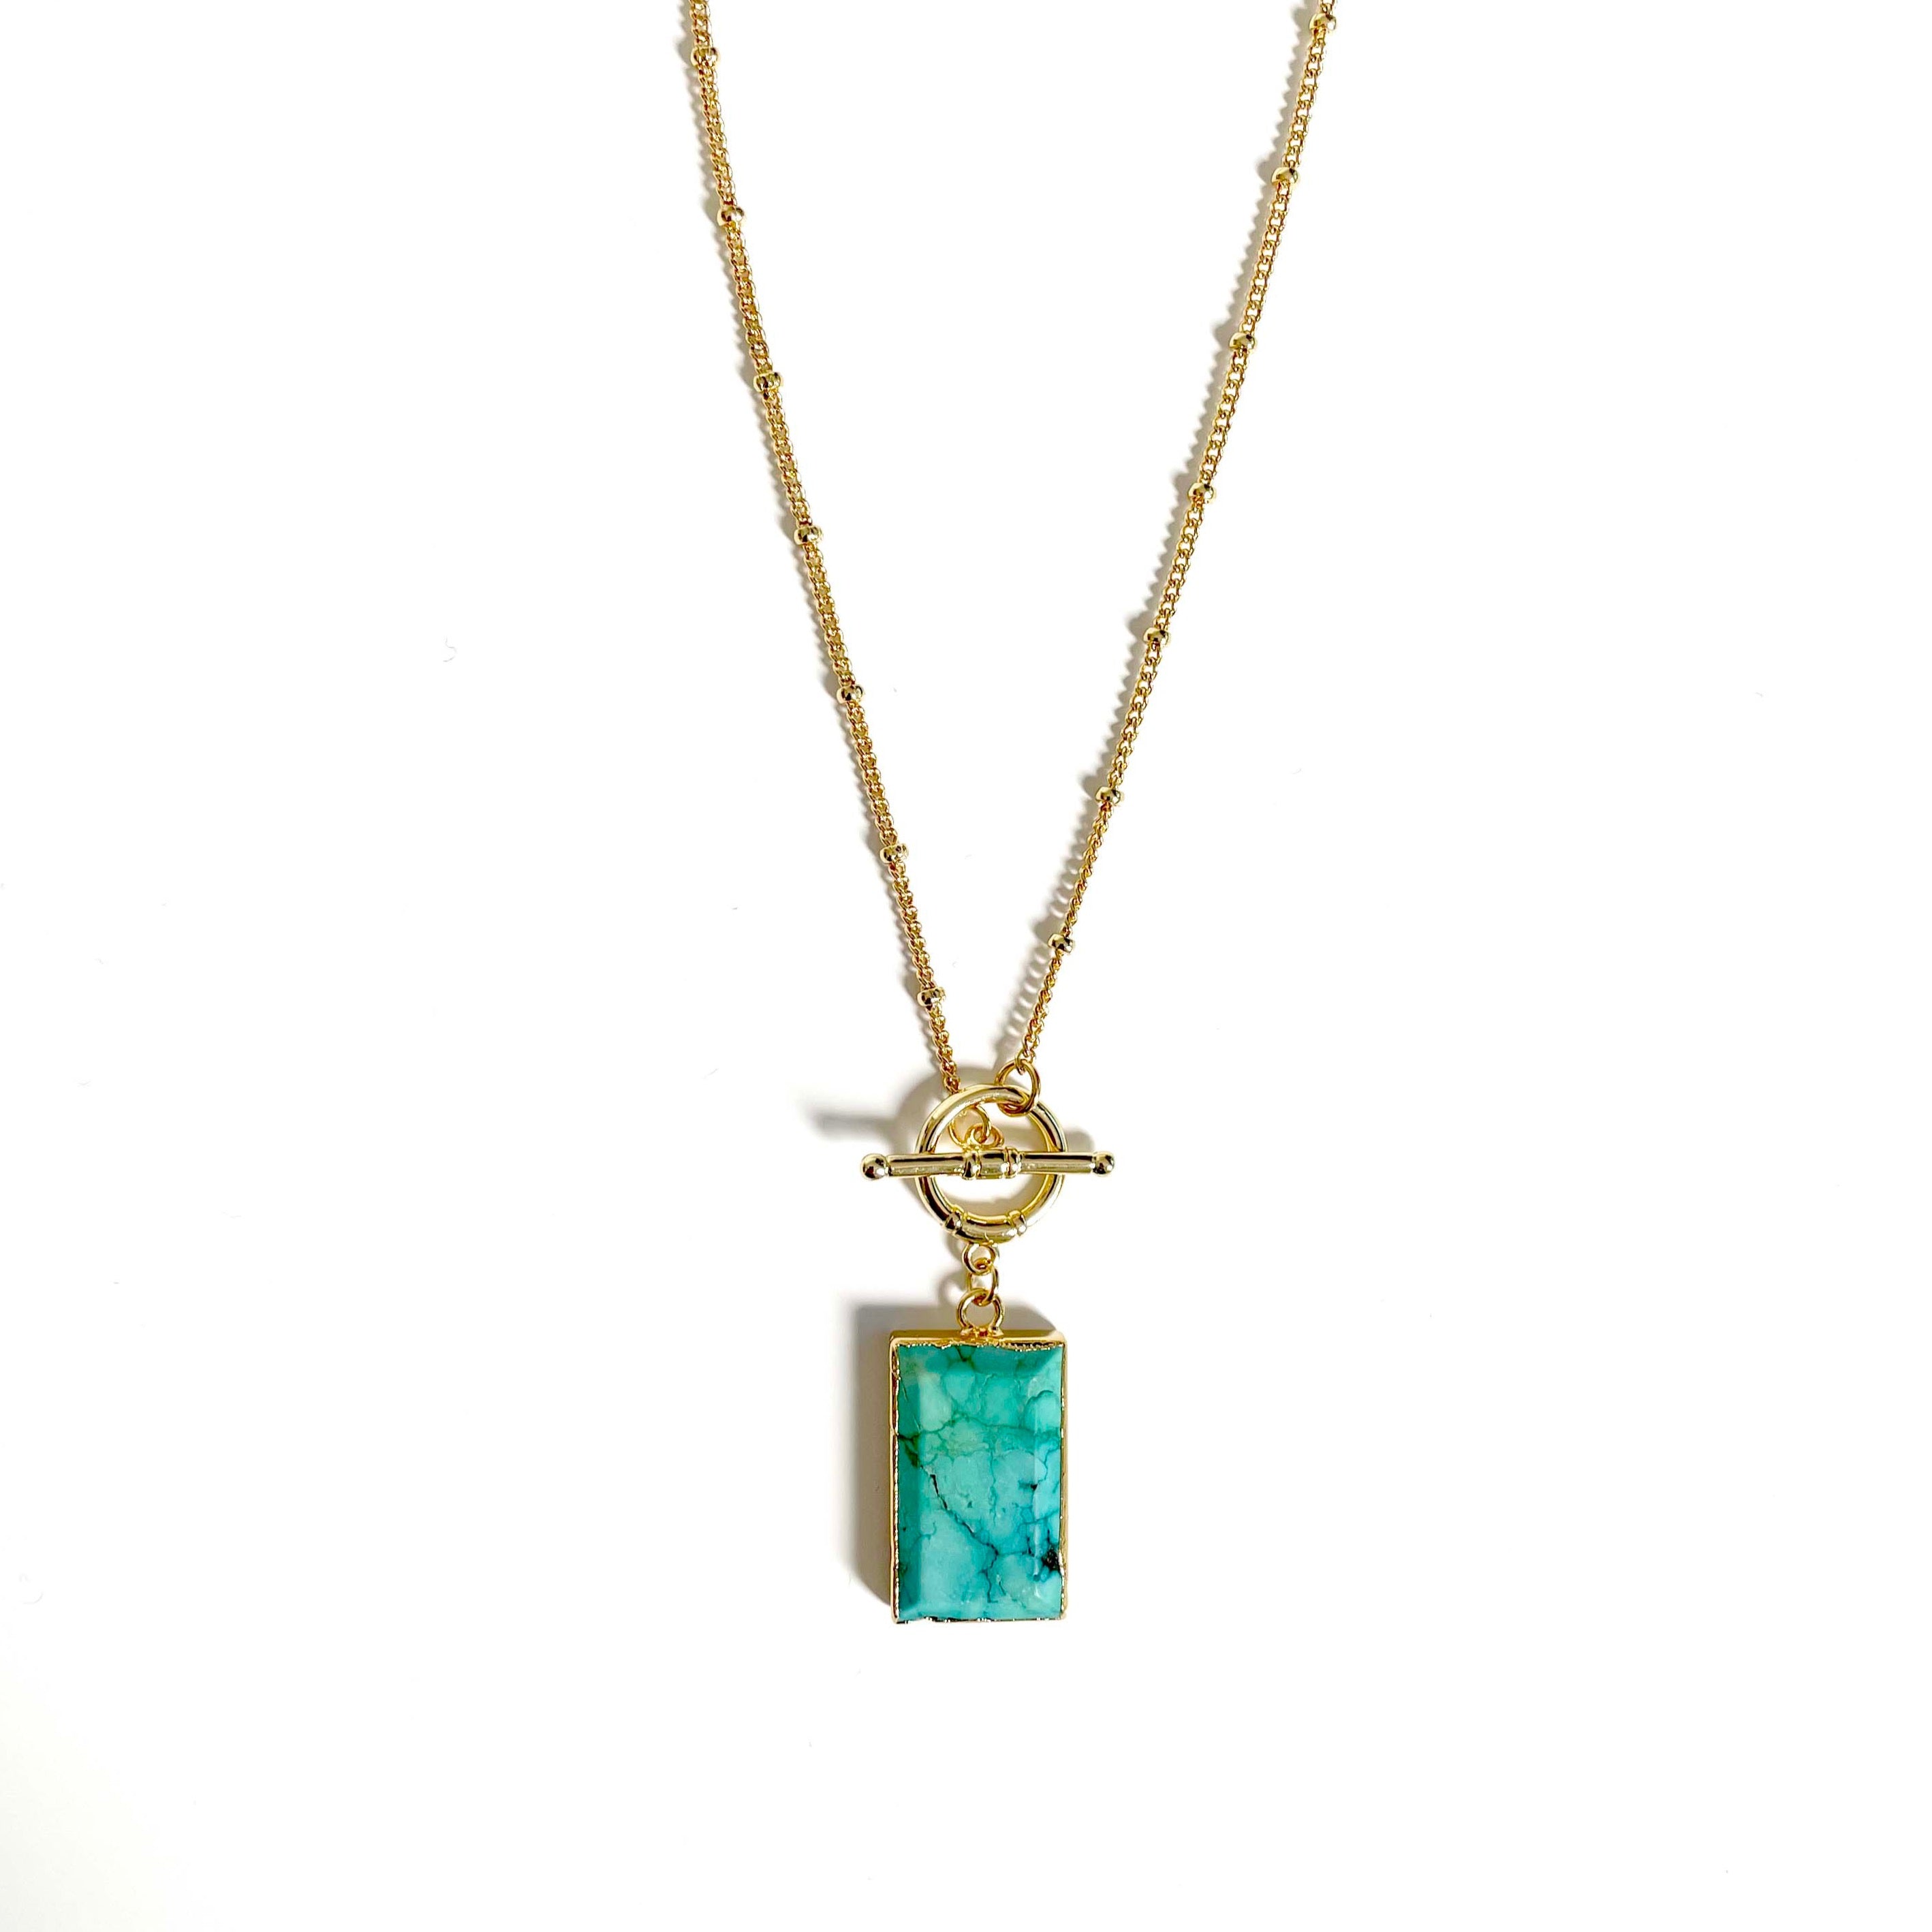 Bali Luxe 18k Gold Turquoise T Bar Necklace